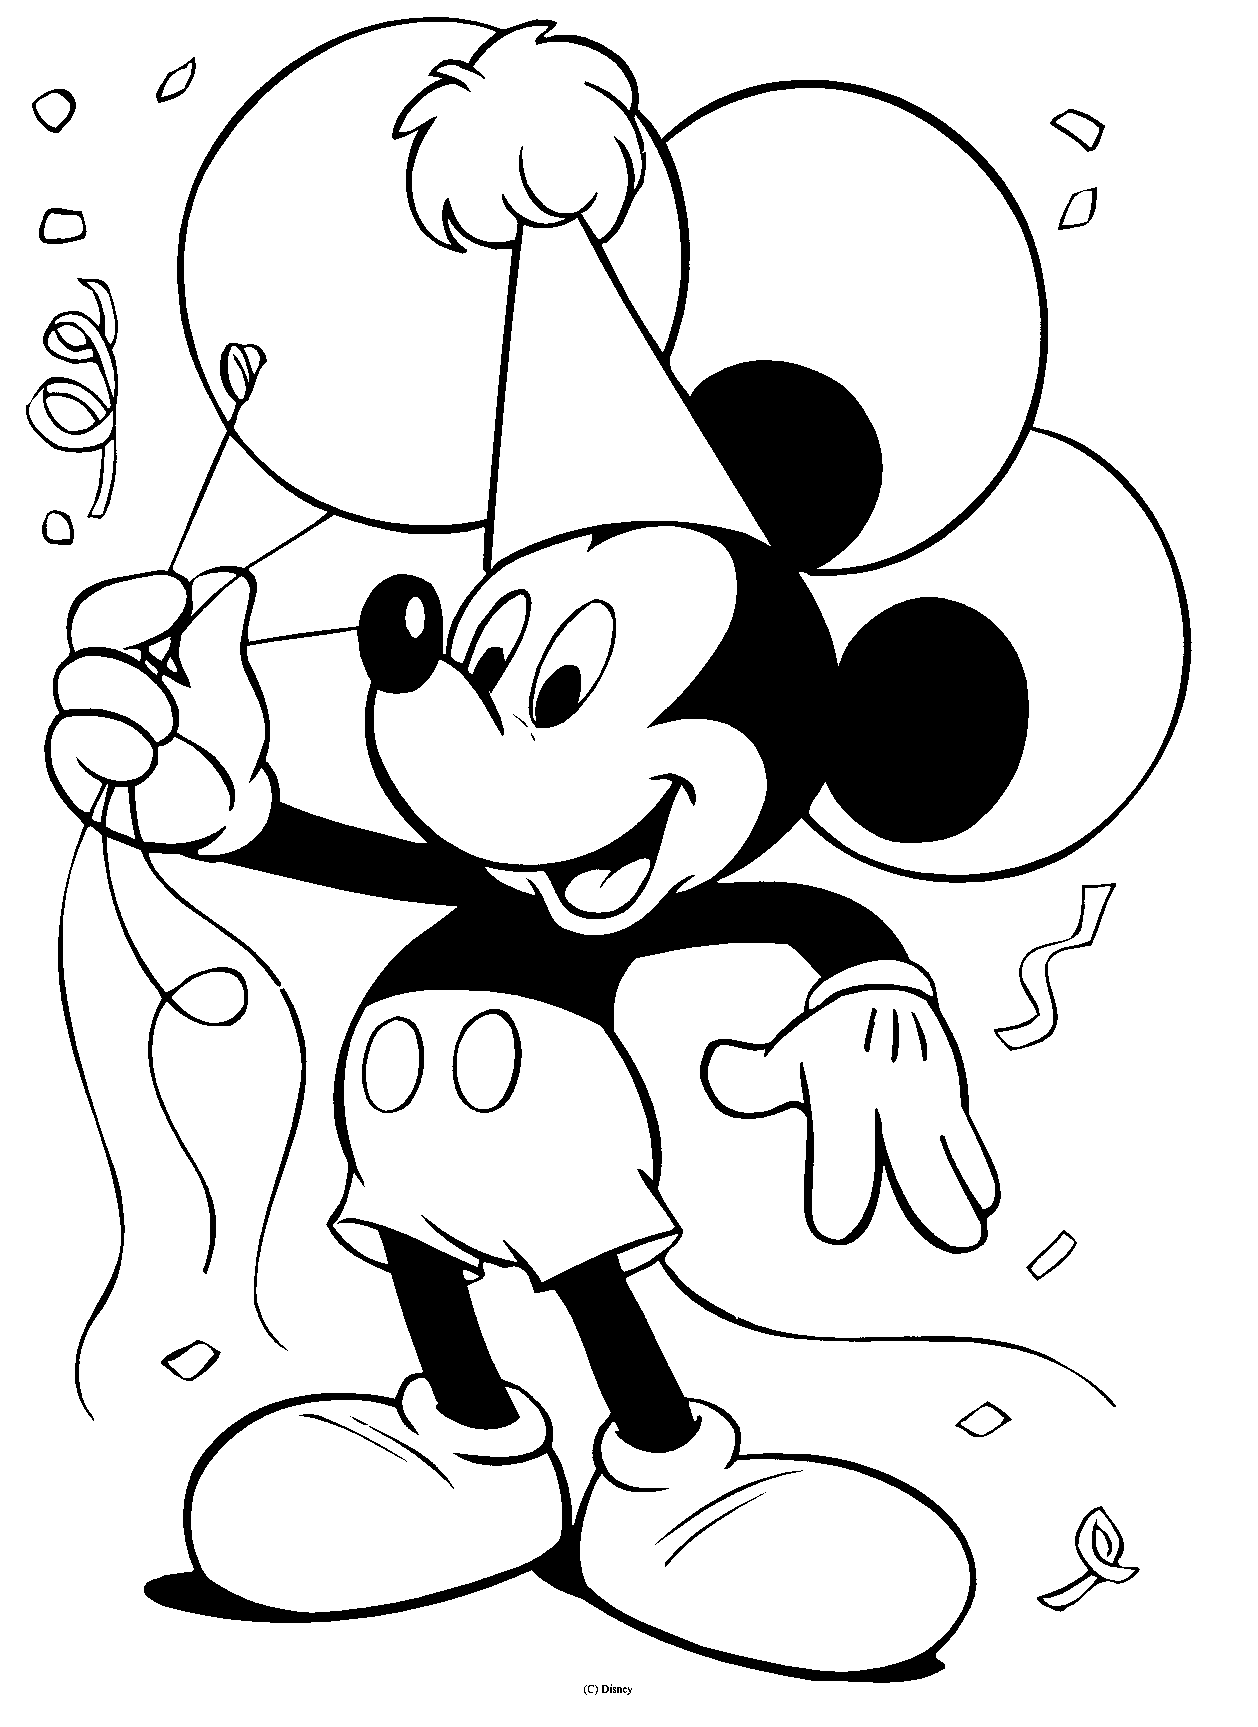 Mickey mouse clipart free large images